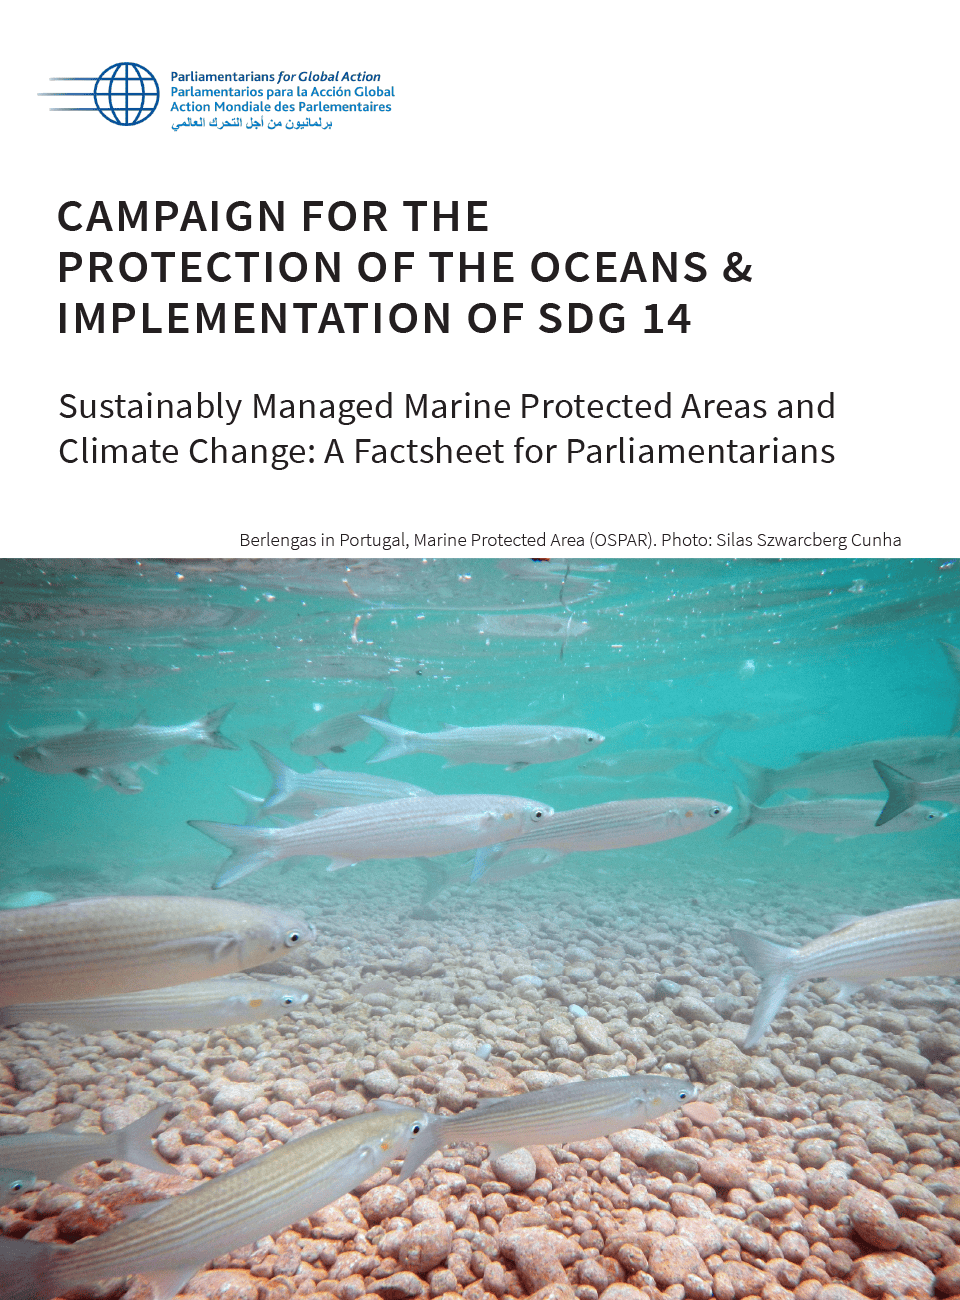 Factsheet for Parliamentarians: Sustainably Managed Marine Protected Areas and Climate Change